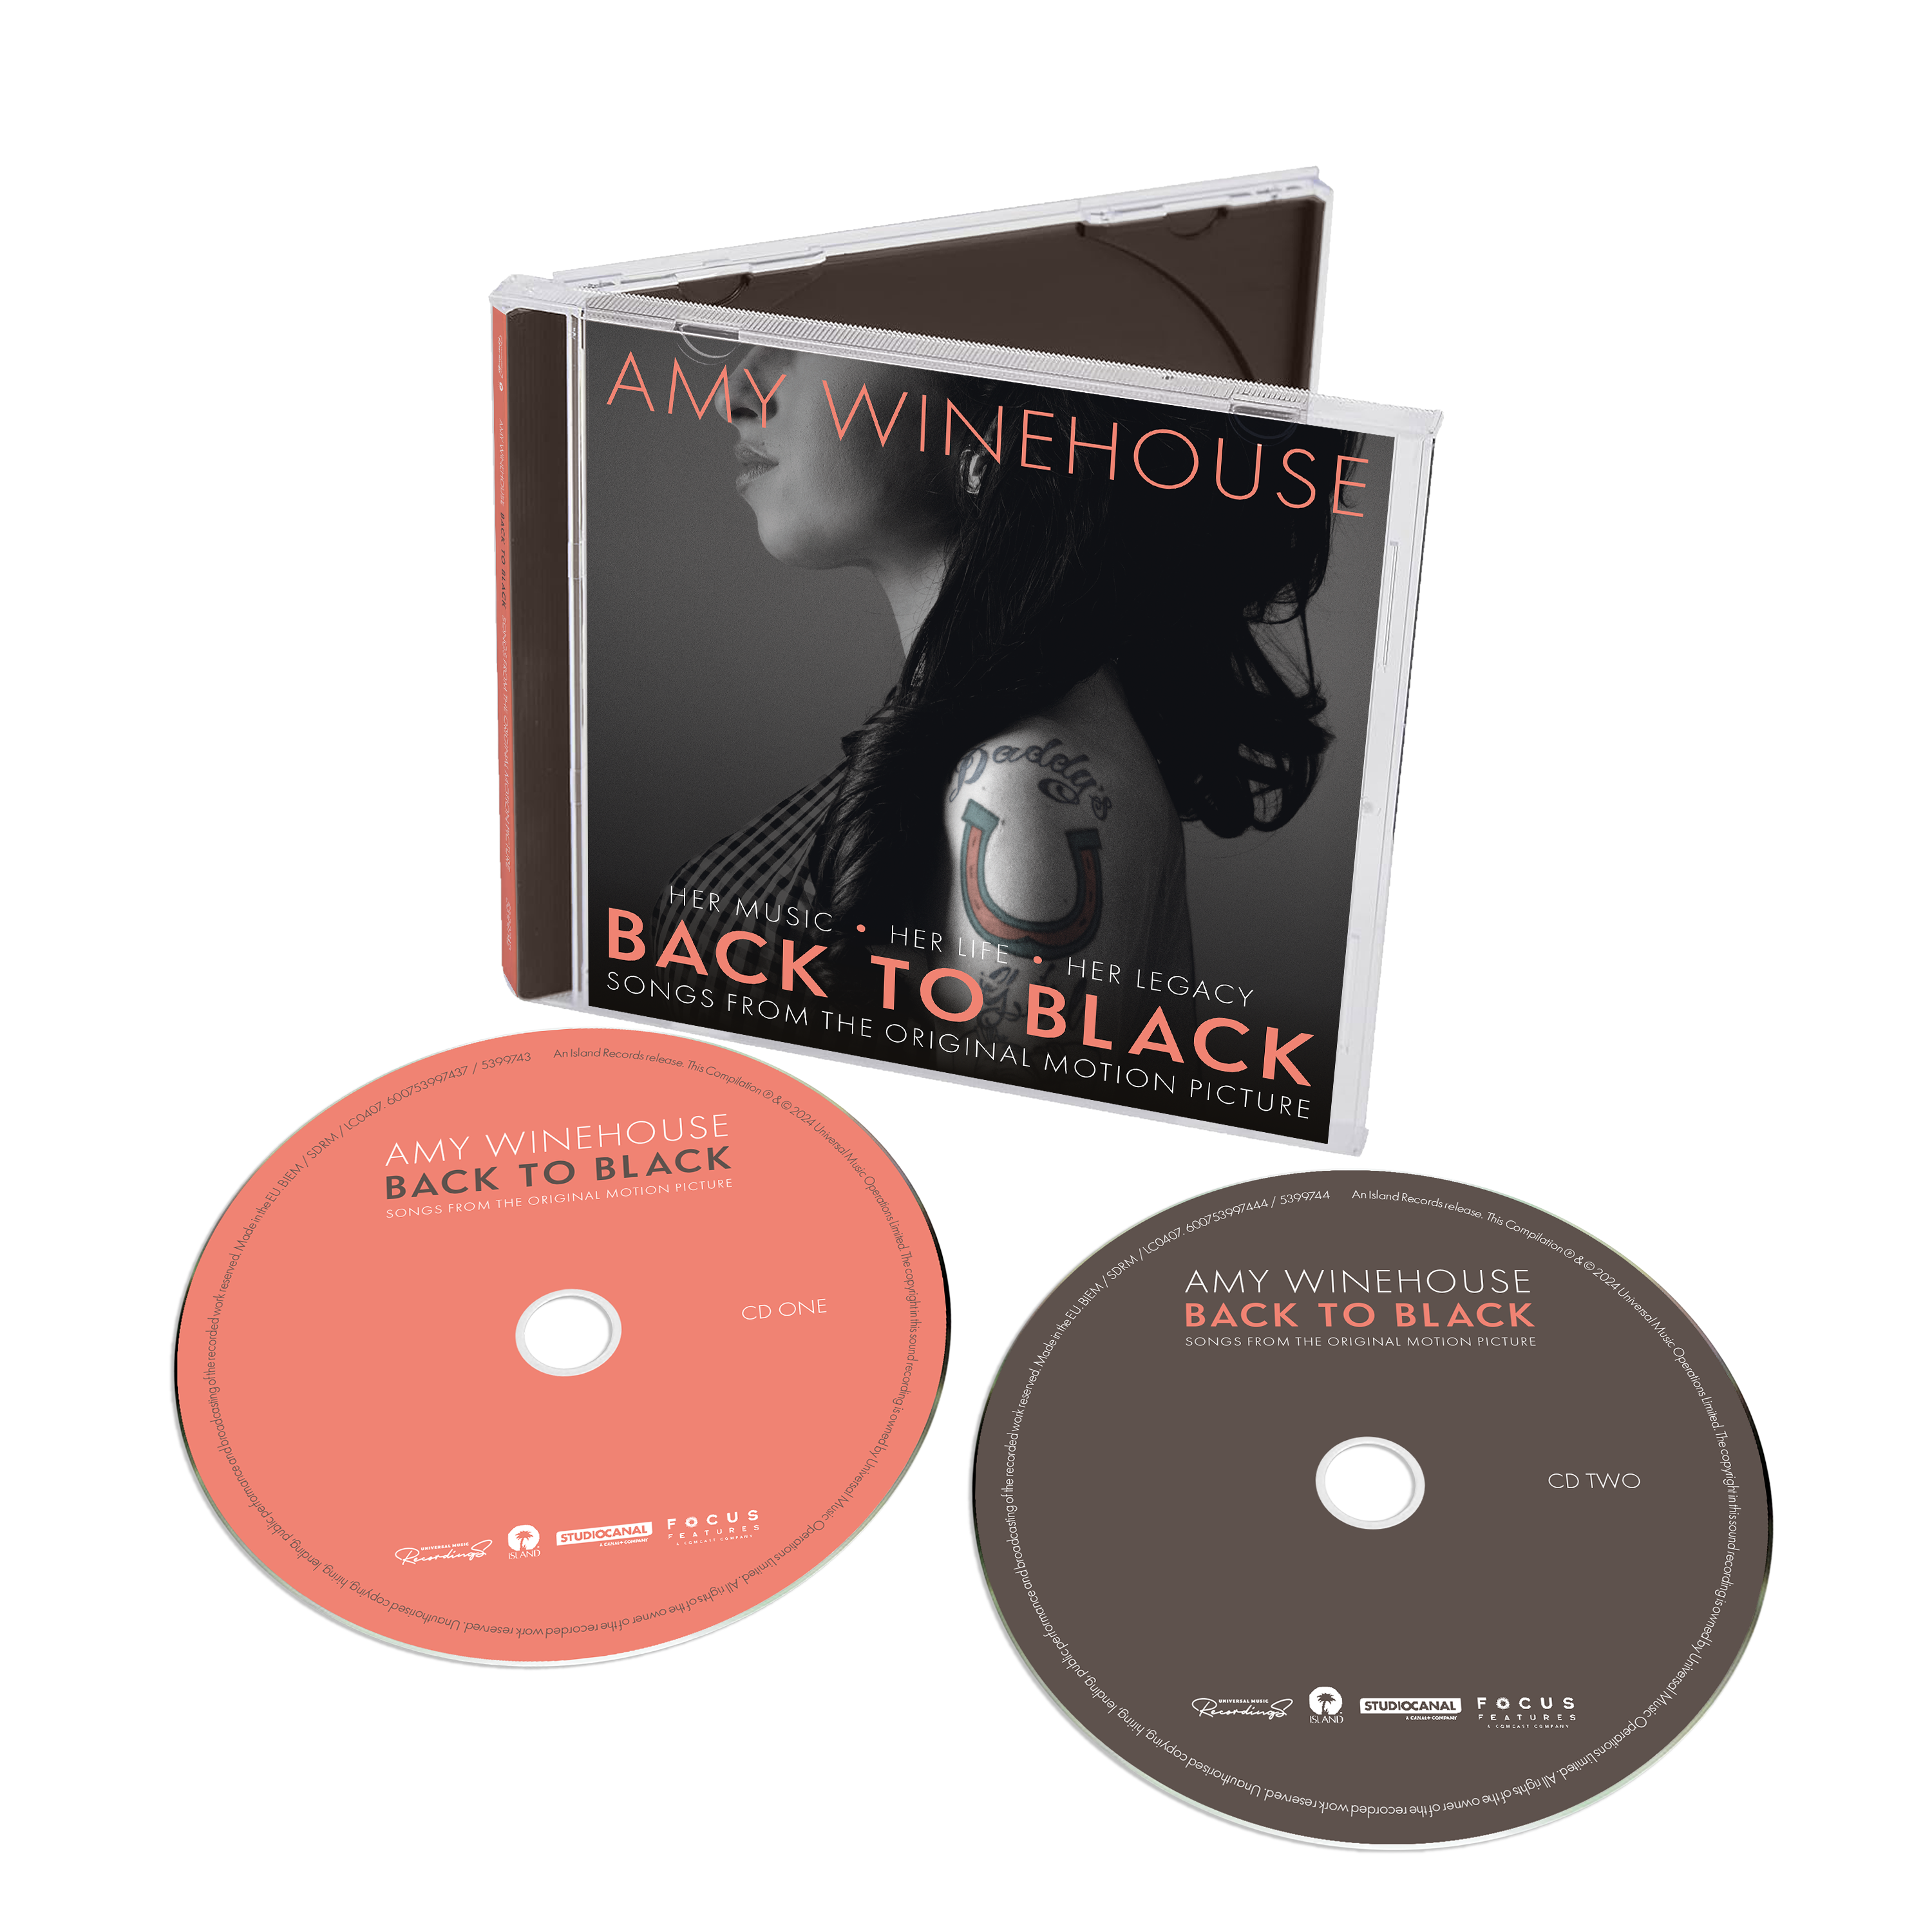 Original Soundtrack - Back To Black - Songs from the Original Motion Picture: 2CD